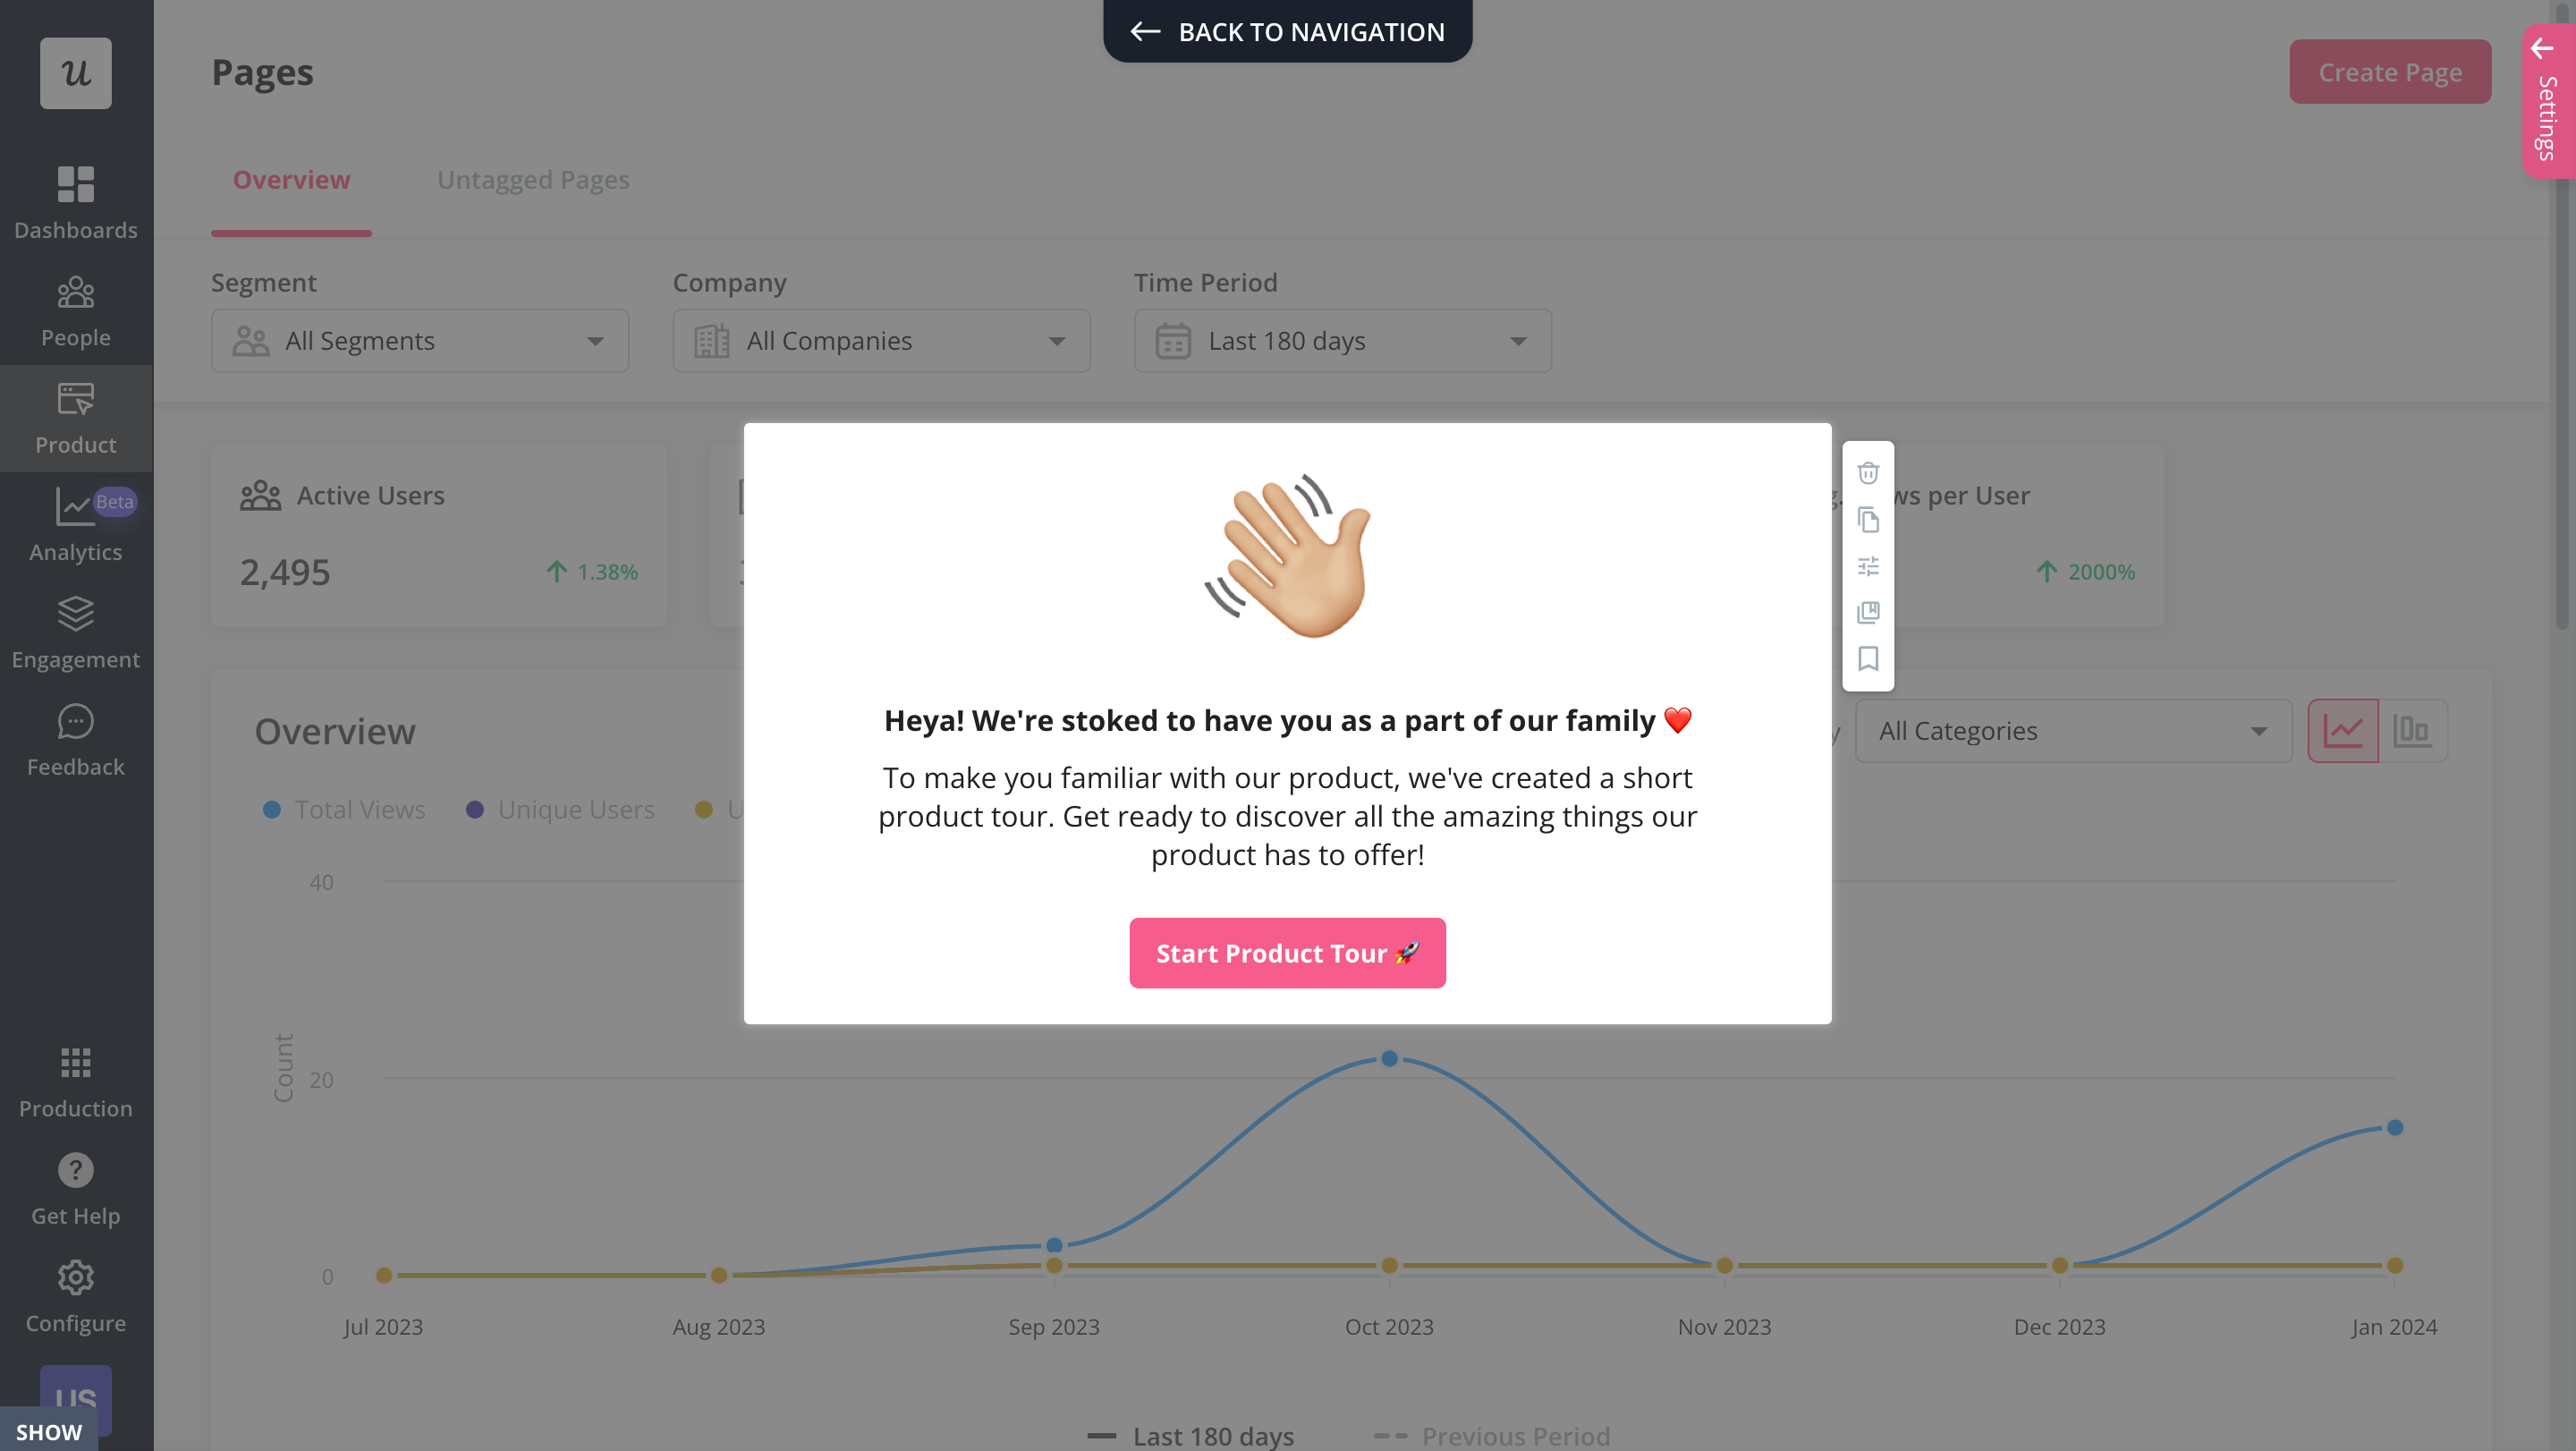 Tailor in-app experiences to improve customer retention with Userpilot.